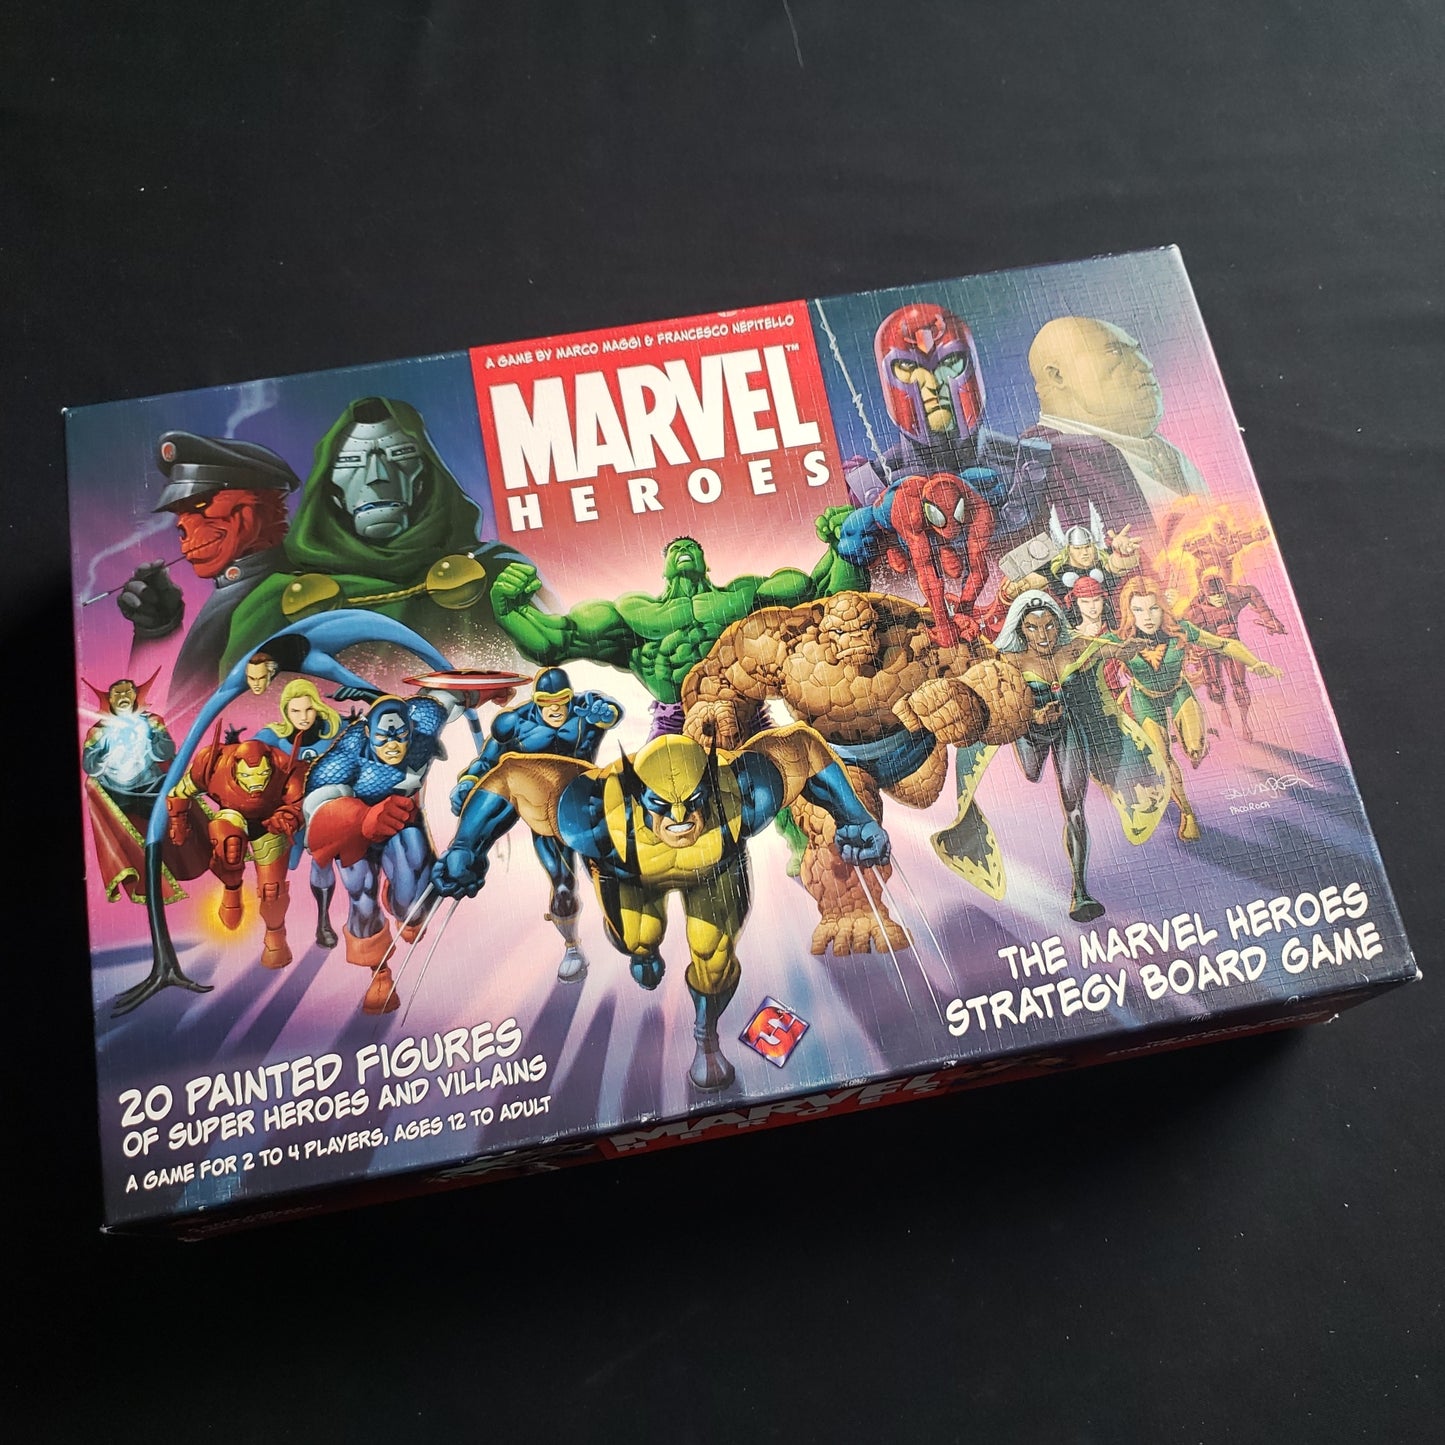 Image shows the front cover of the box of the Marvel Heroes board game